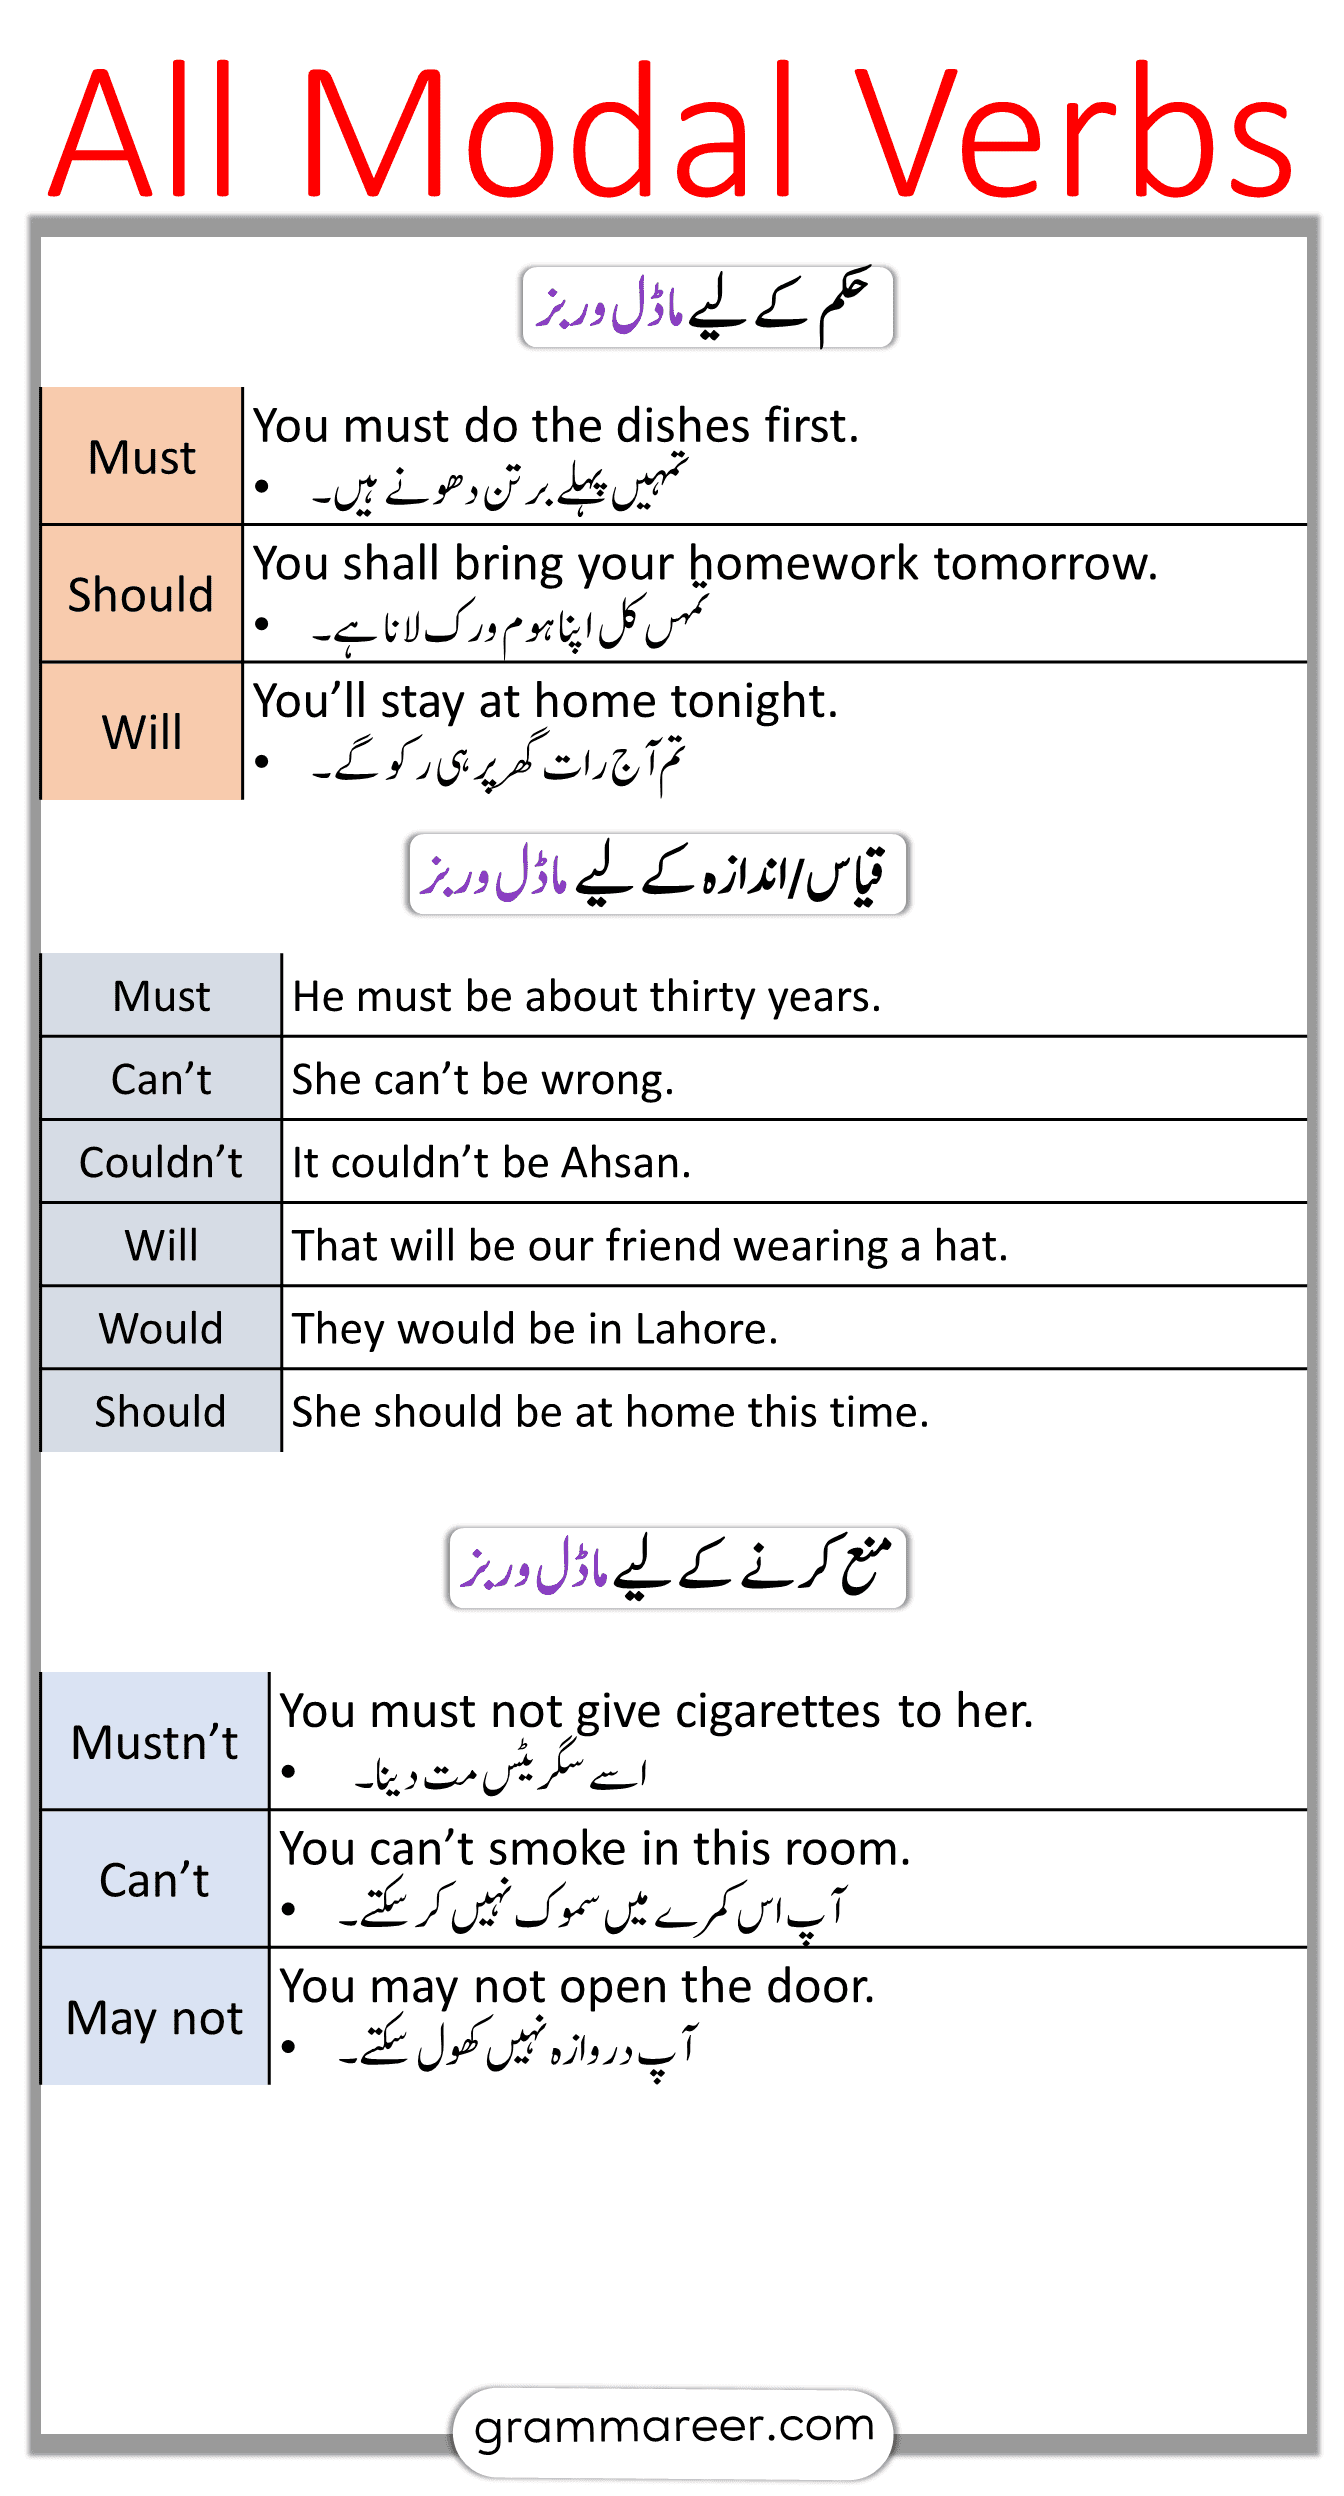 All Modal Verbs with Example Sentences in Urdu